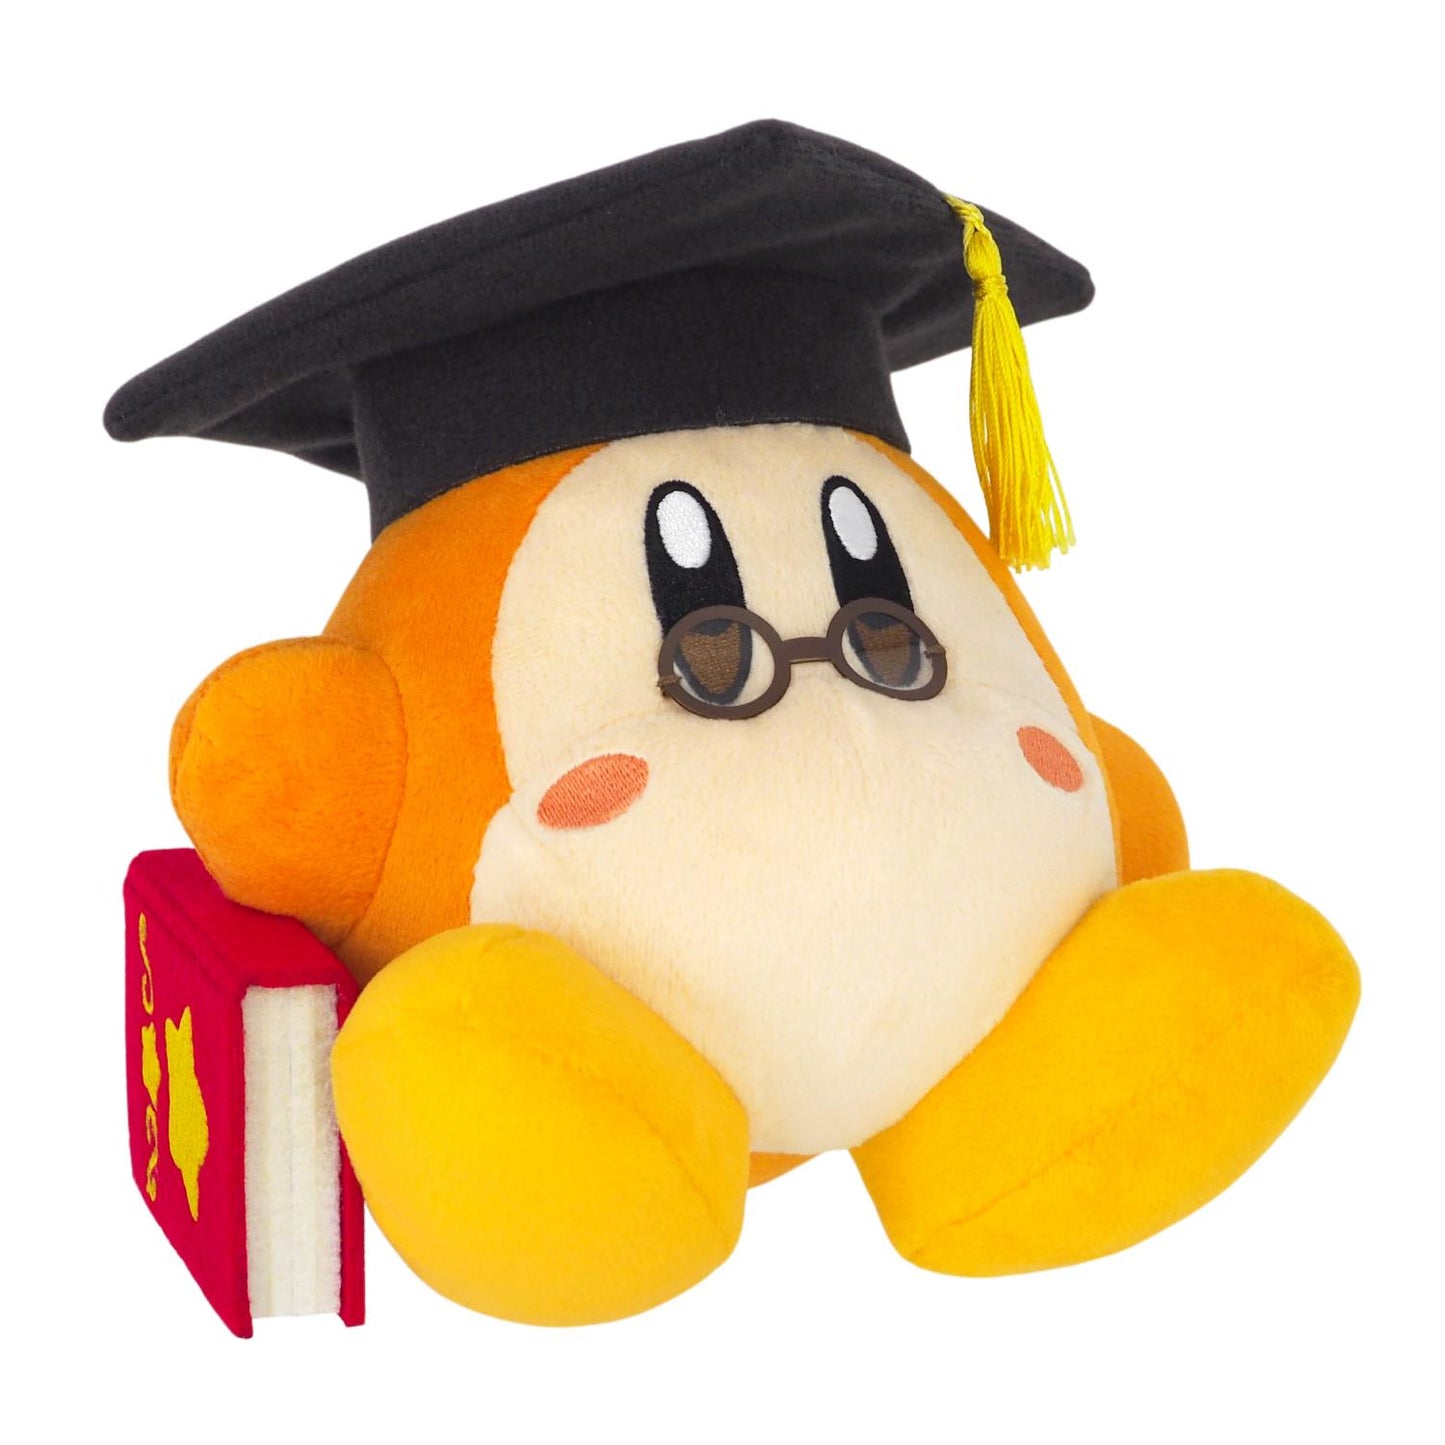 Kirby: Waddle Dee Wise (S) Plush